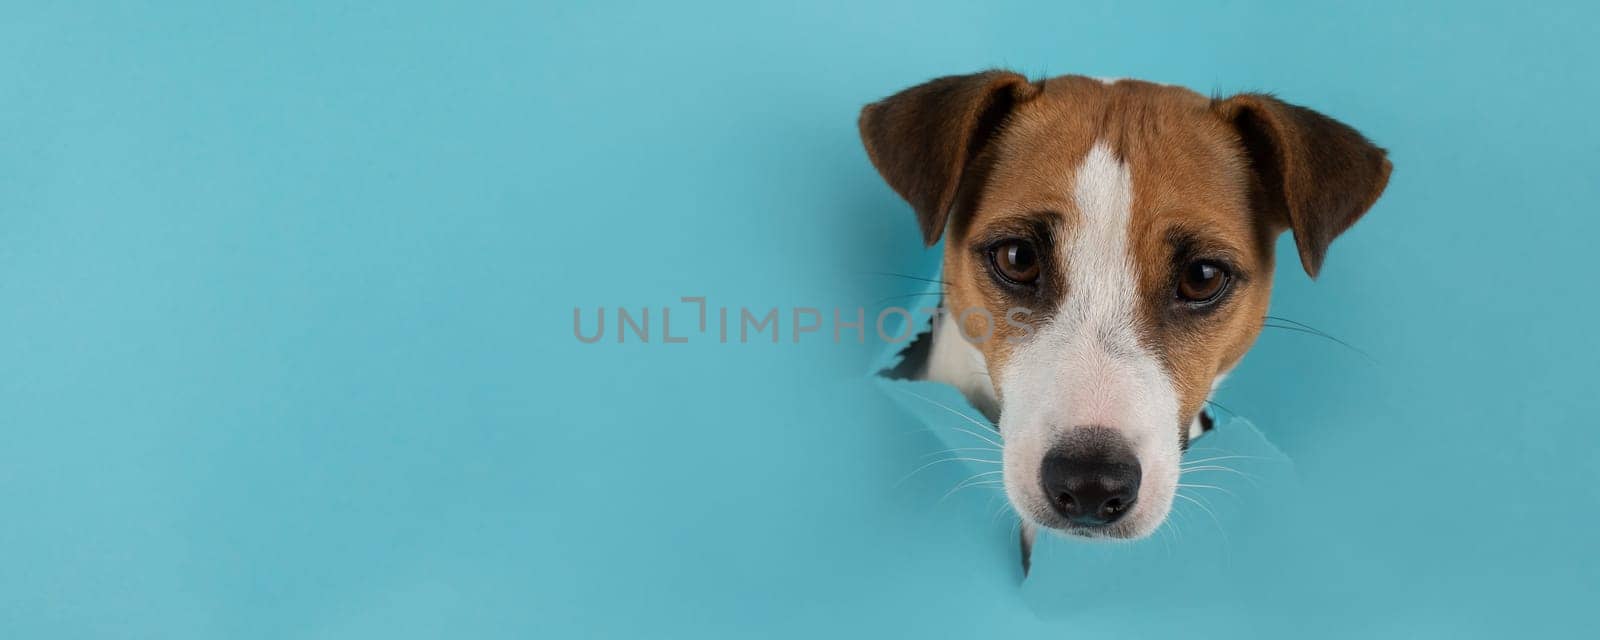 Funny dog muzzle jack russell terrier sticks out of a hole in a blue cardboard background. Widescreen